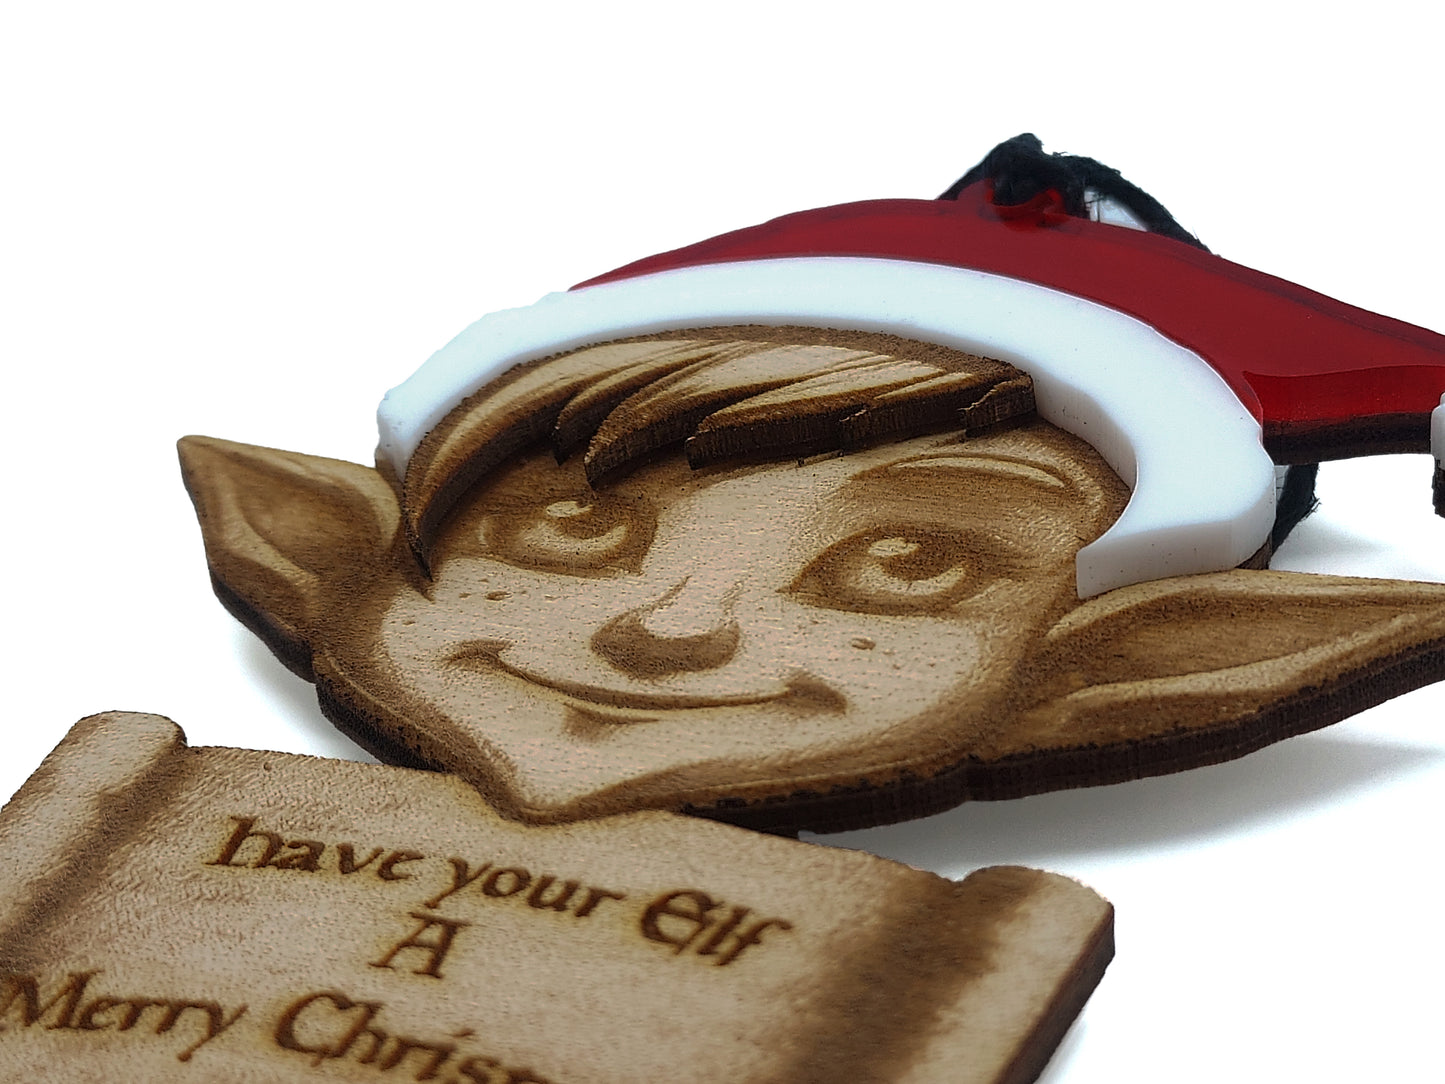 Have your Elf a Merry Christmas!   Christmas Ornament - Fantasy Elf, Dungeons and Dragons Elven themed Holiday Decoration